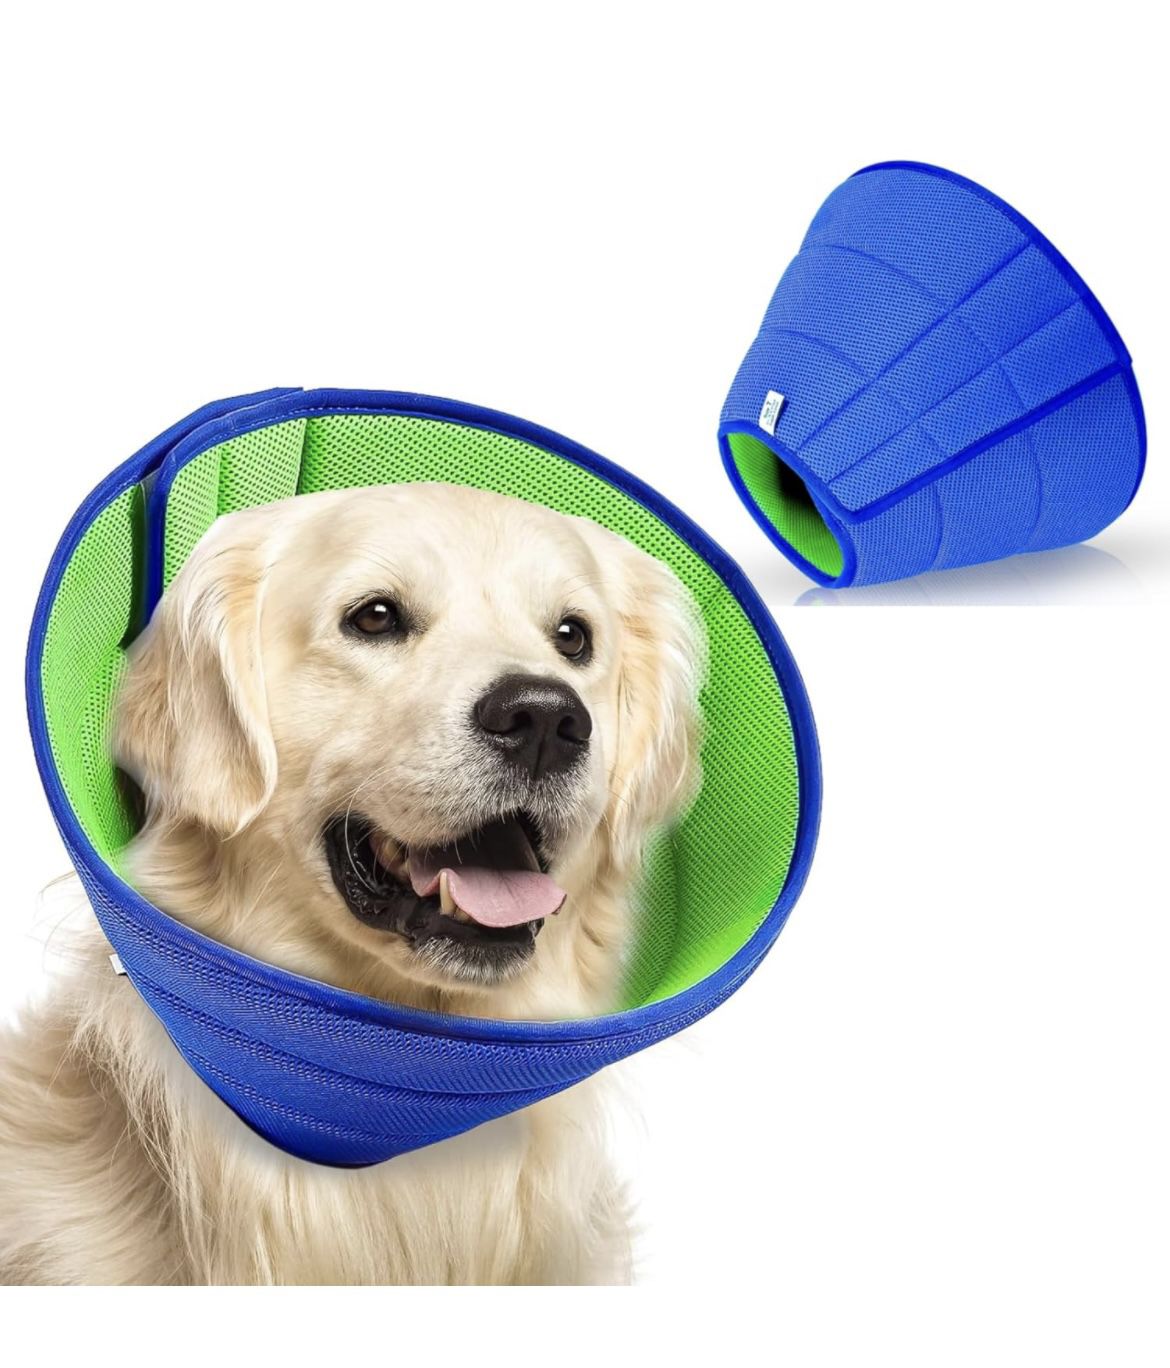 Dog Cone Collar, Pet Recovery Soft Cone Callar for Dogs for After Surgery Prevent Biting Licking Scratching Touching